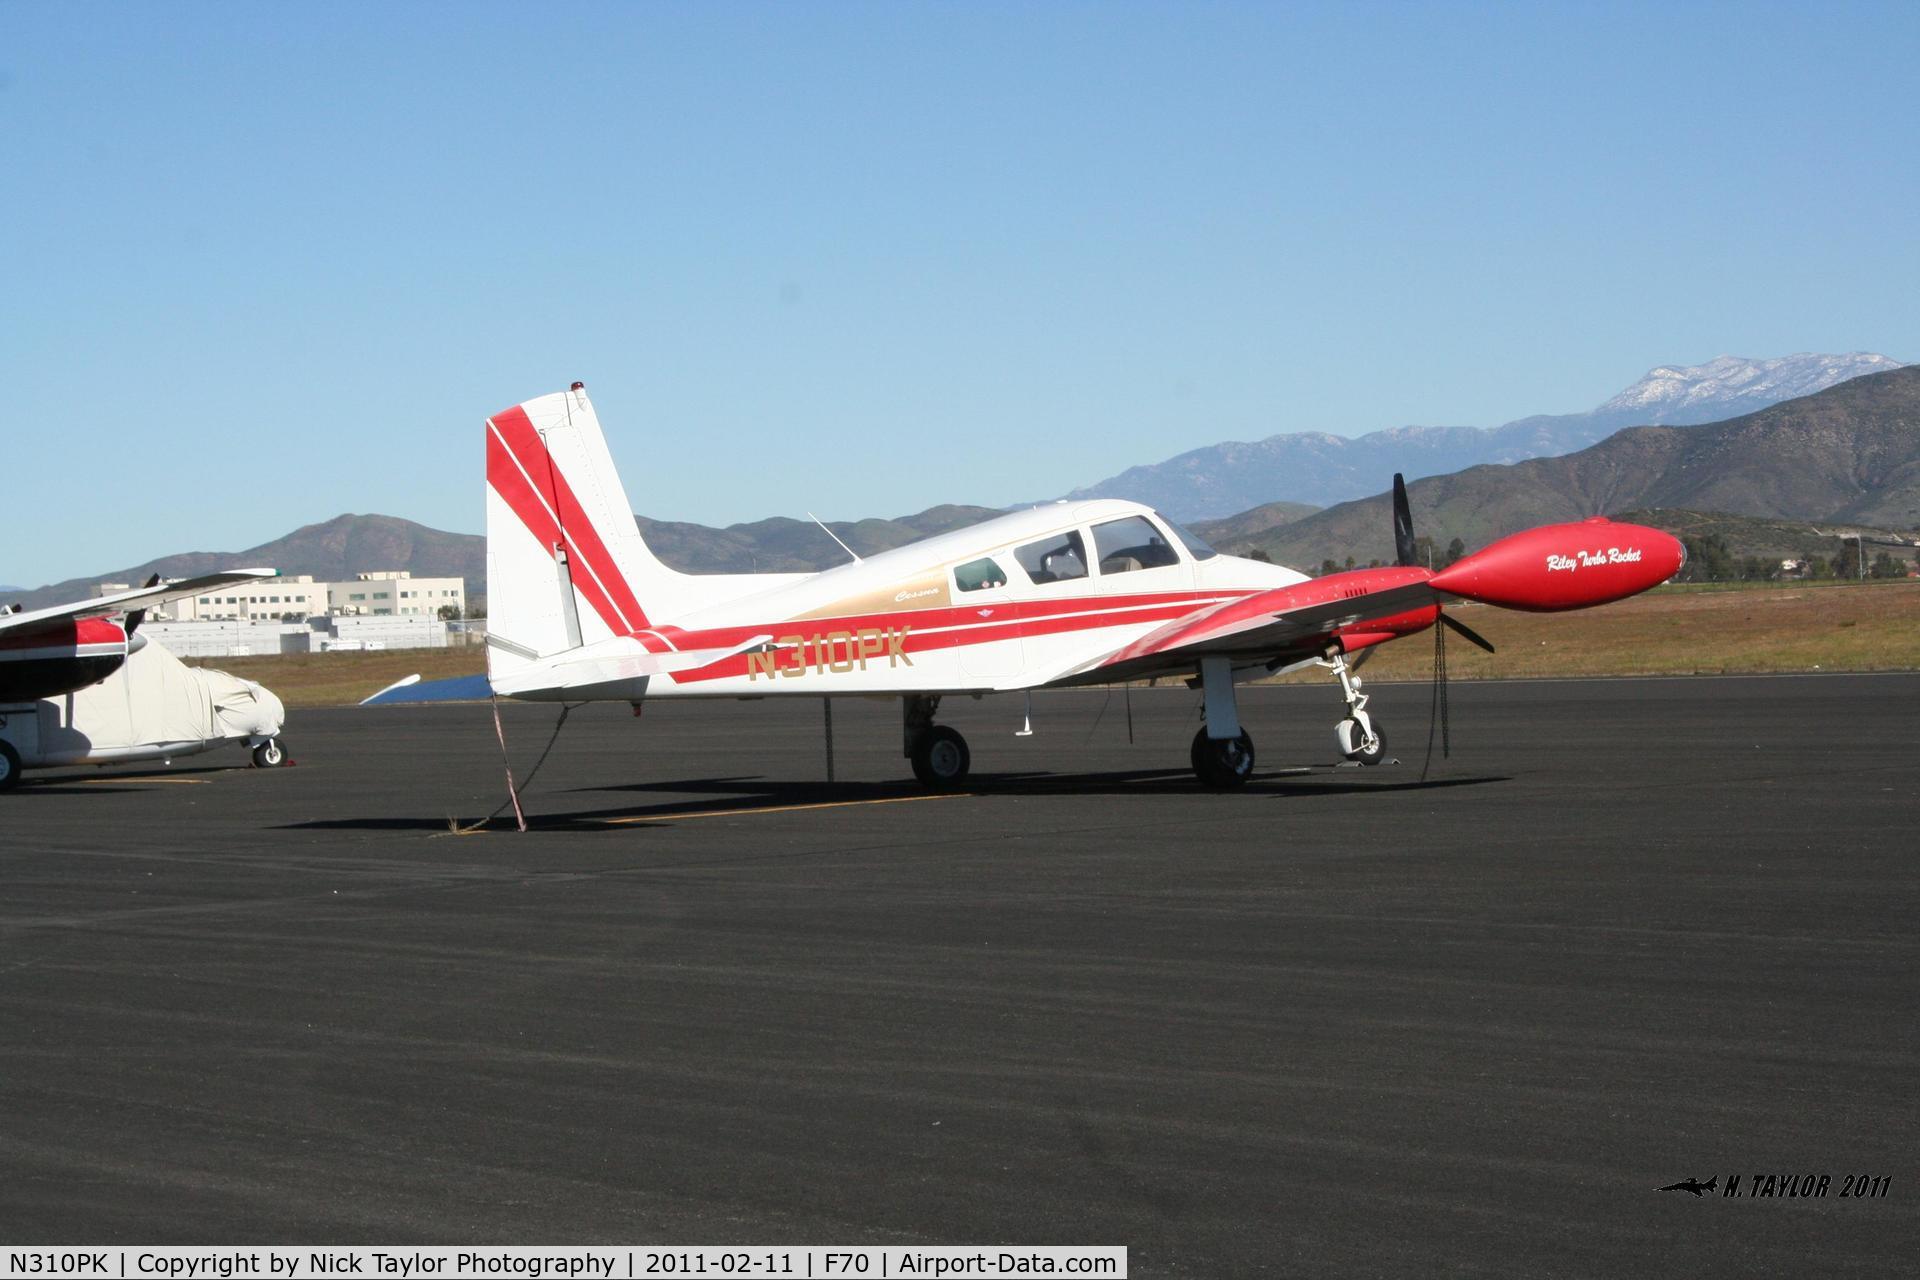 N310PK, 1955 Cessna 310 C/N 35153, Parked at French Valley